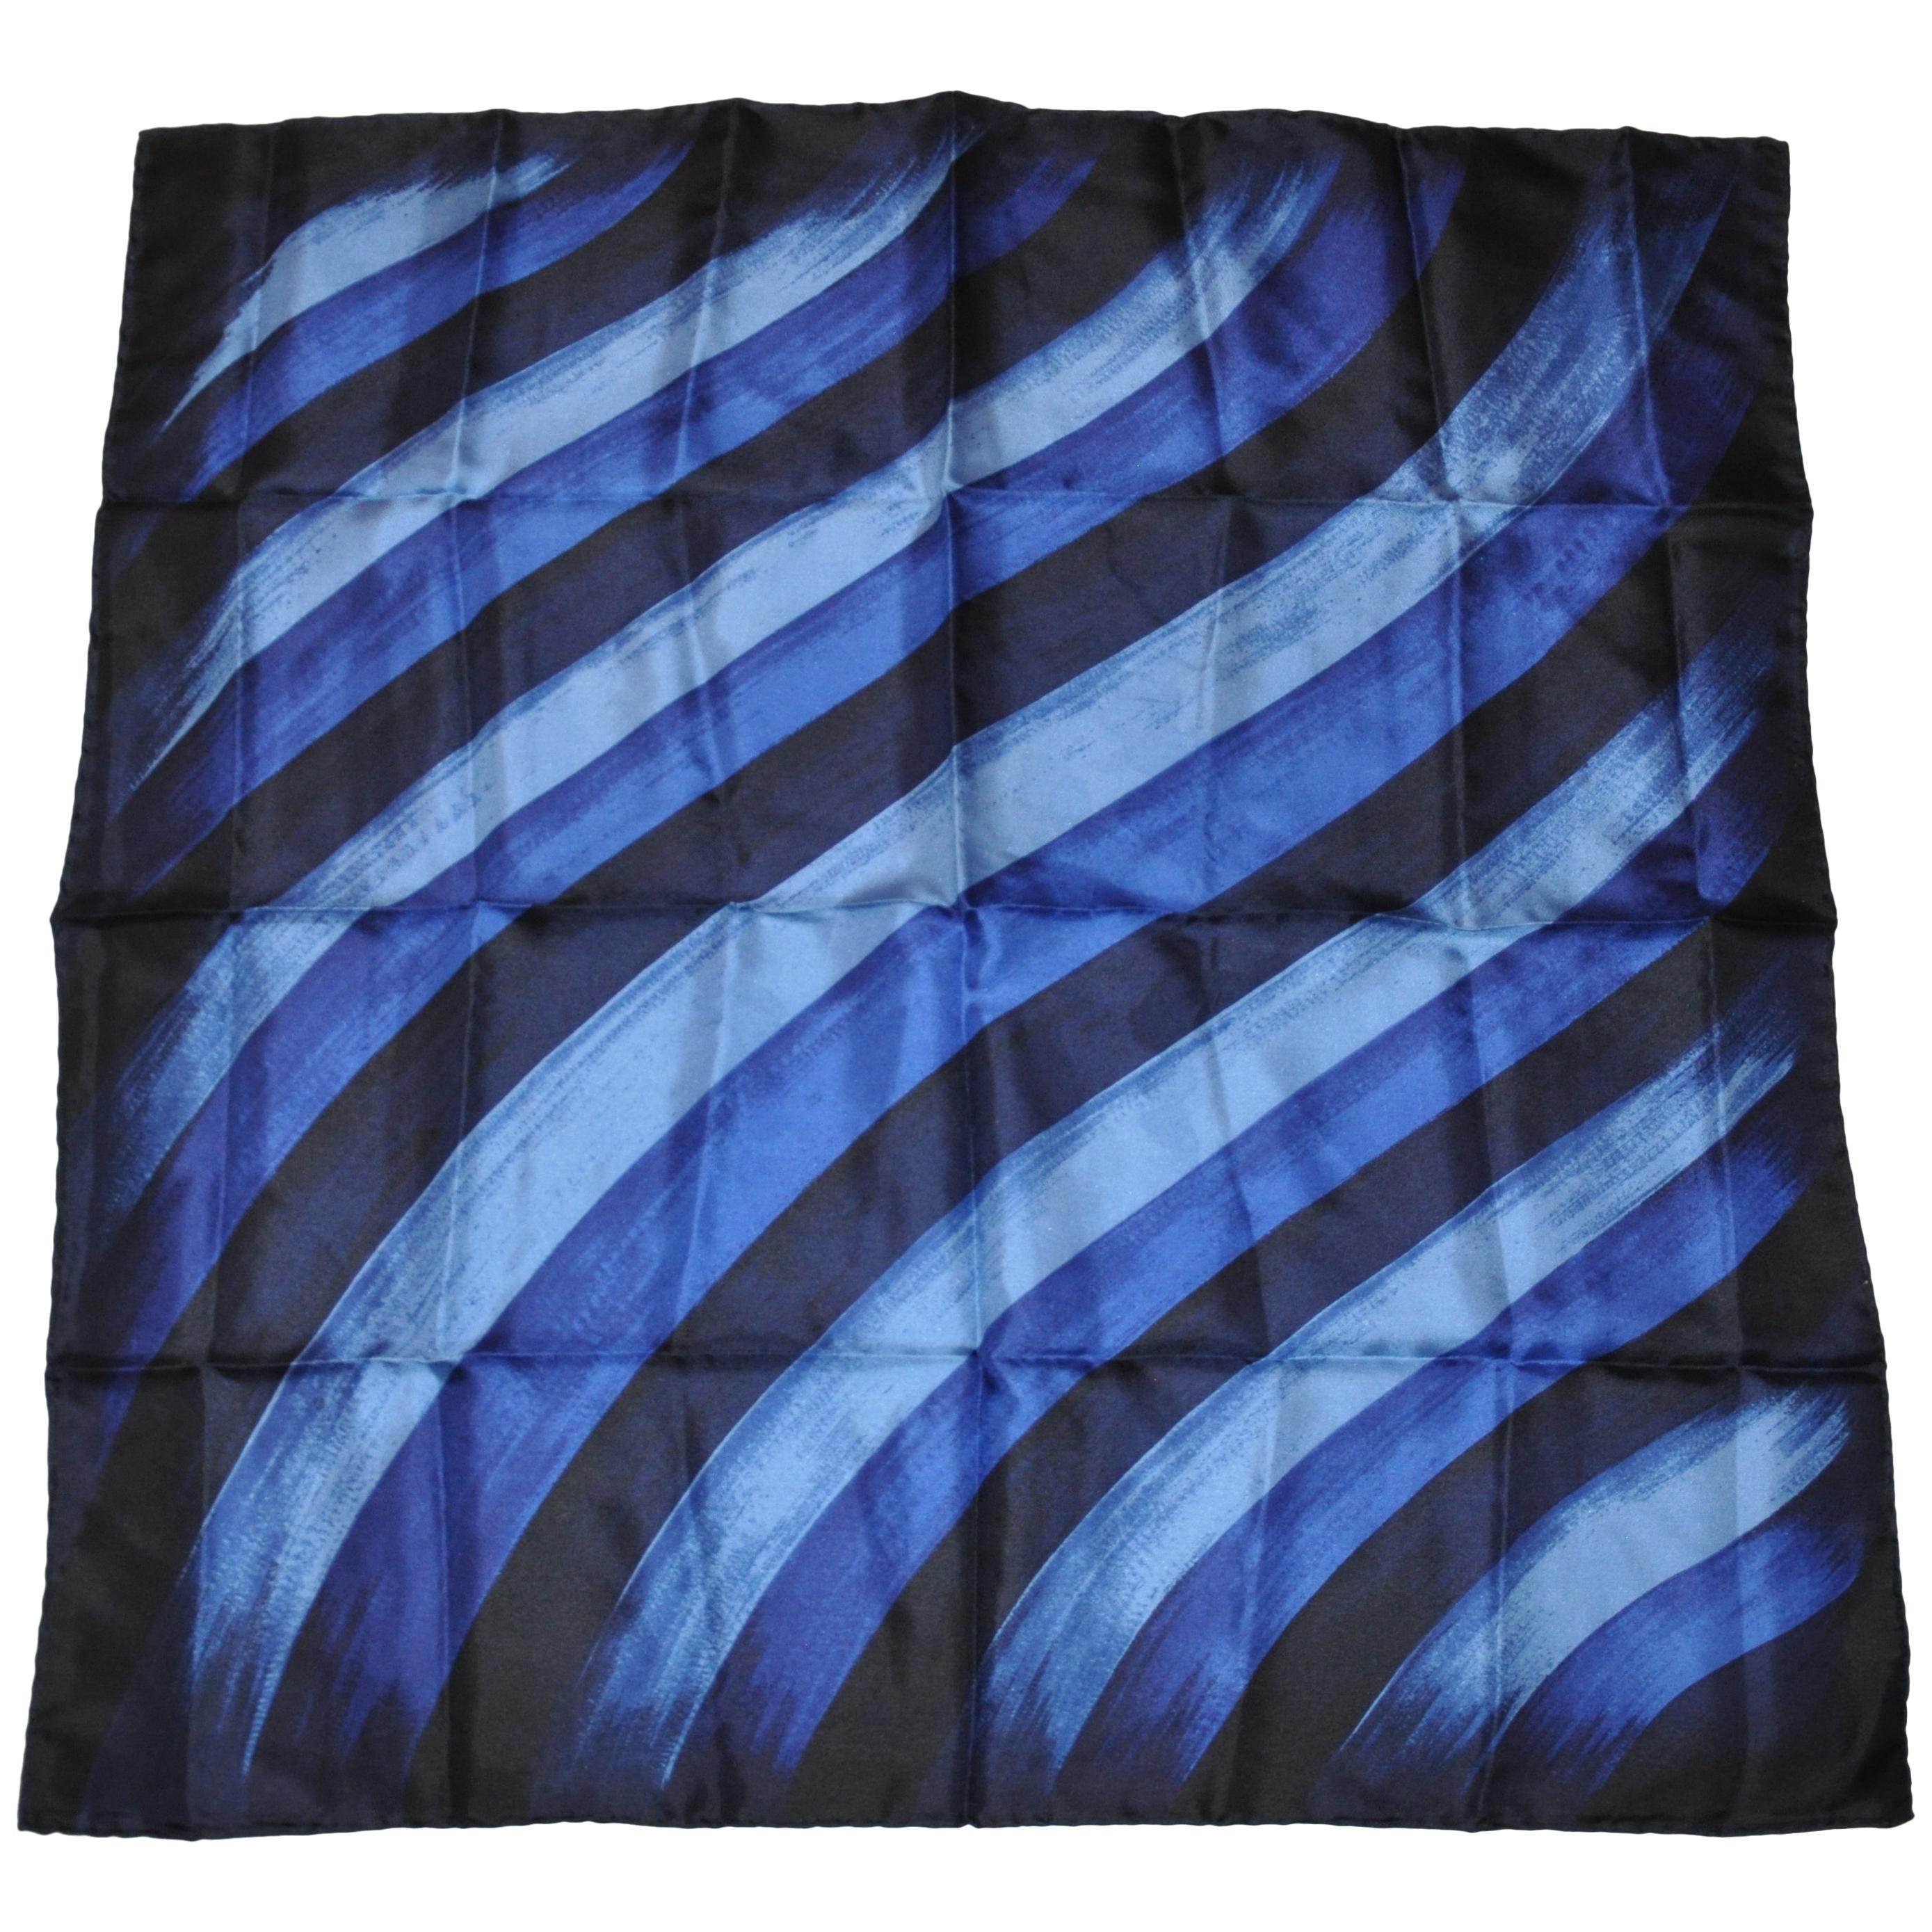 Shades of Blues & Black "Brush Strokes" Silk Scarf with Hand-Rolled Edges For Sale